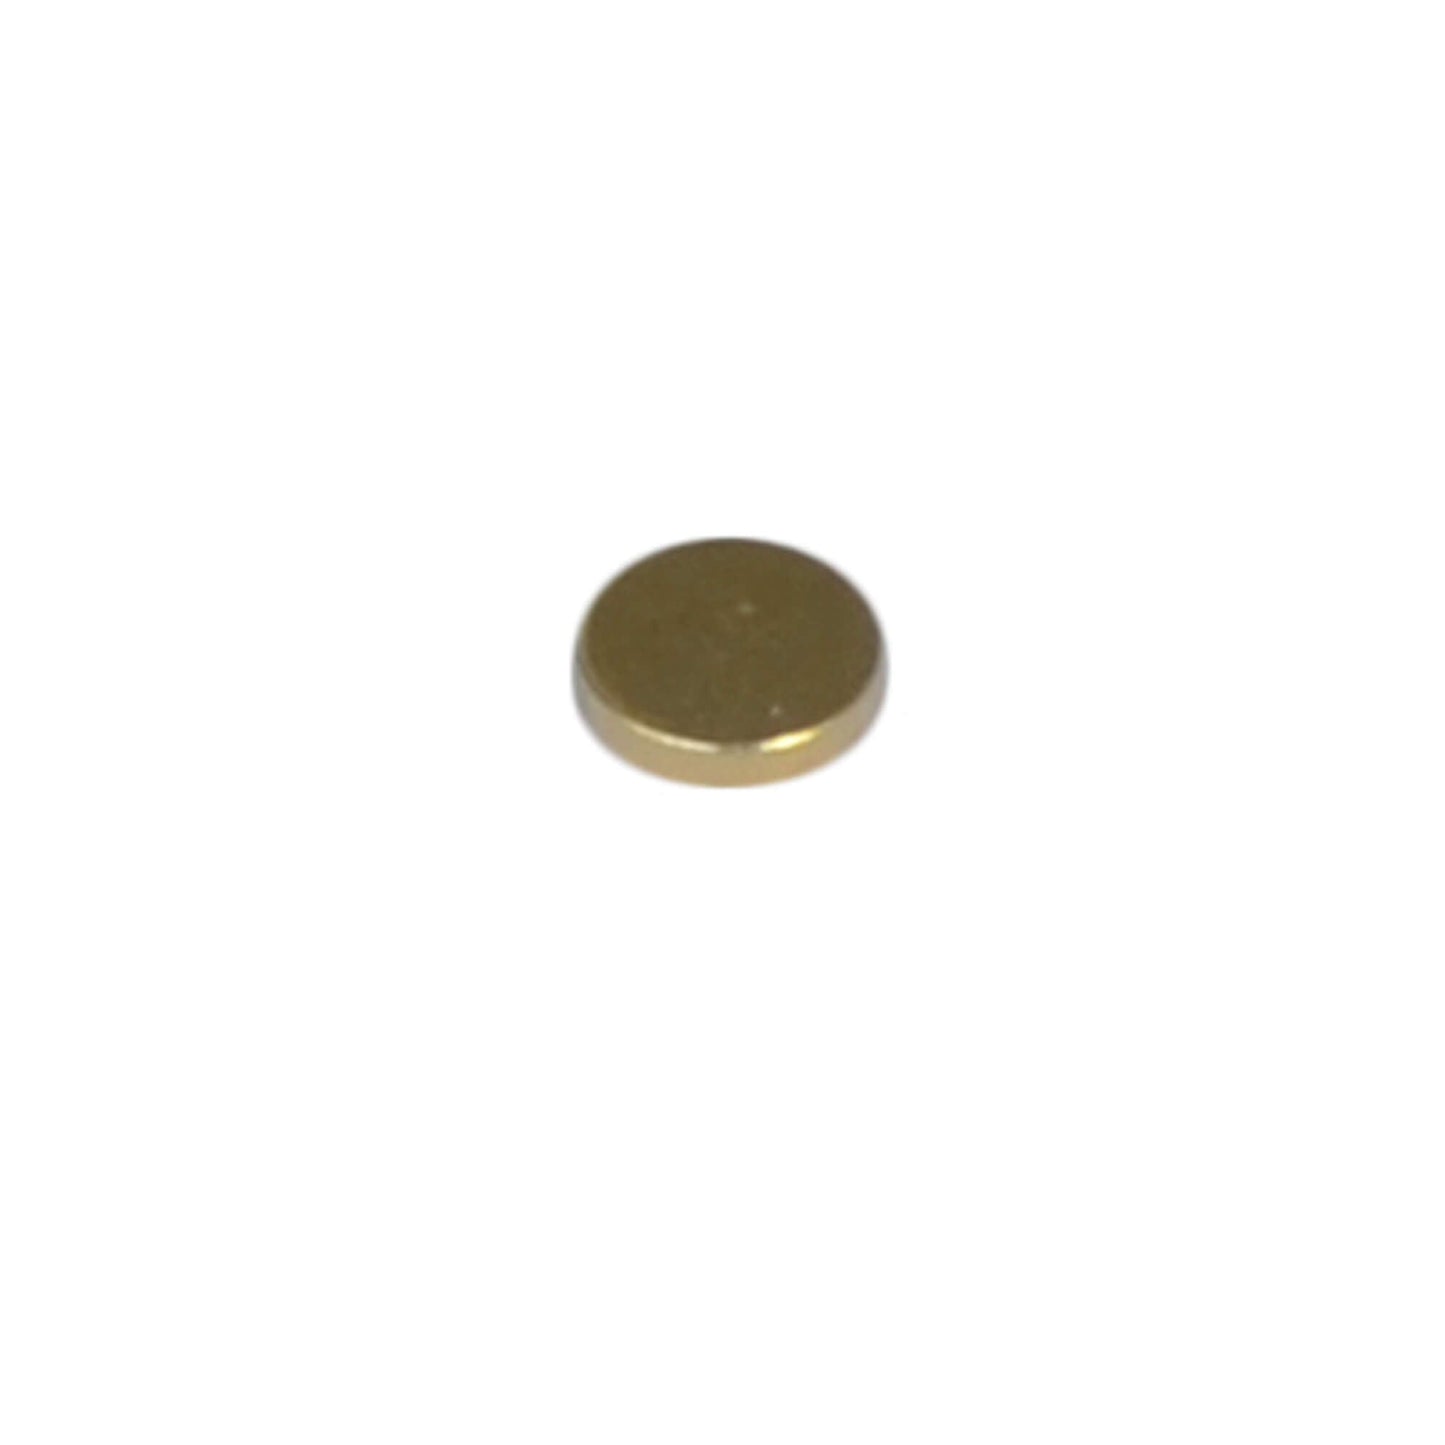 Disk magnets 3000 gauss gold plated 4x1 mm